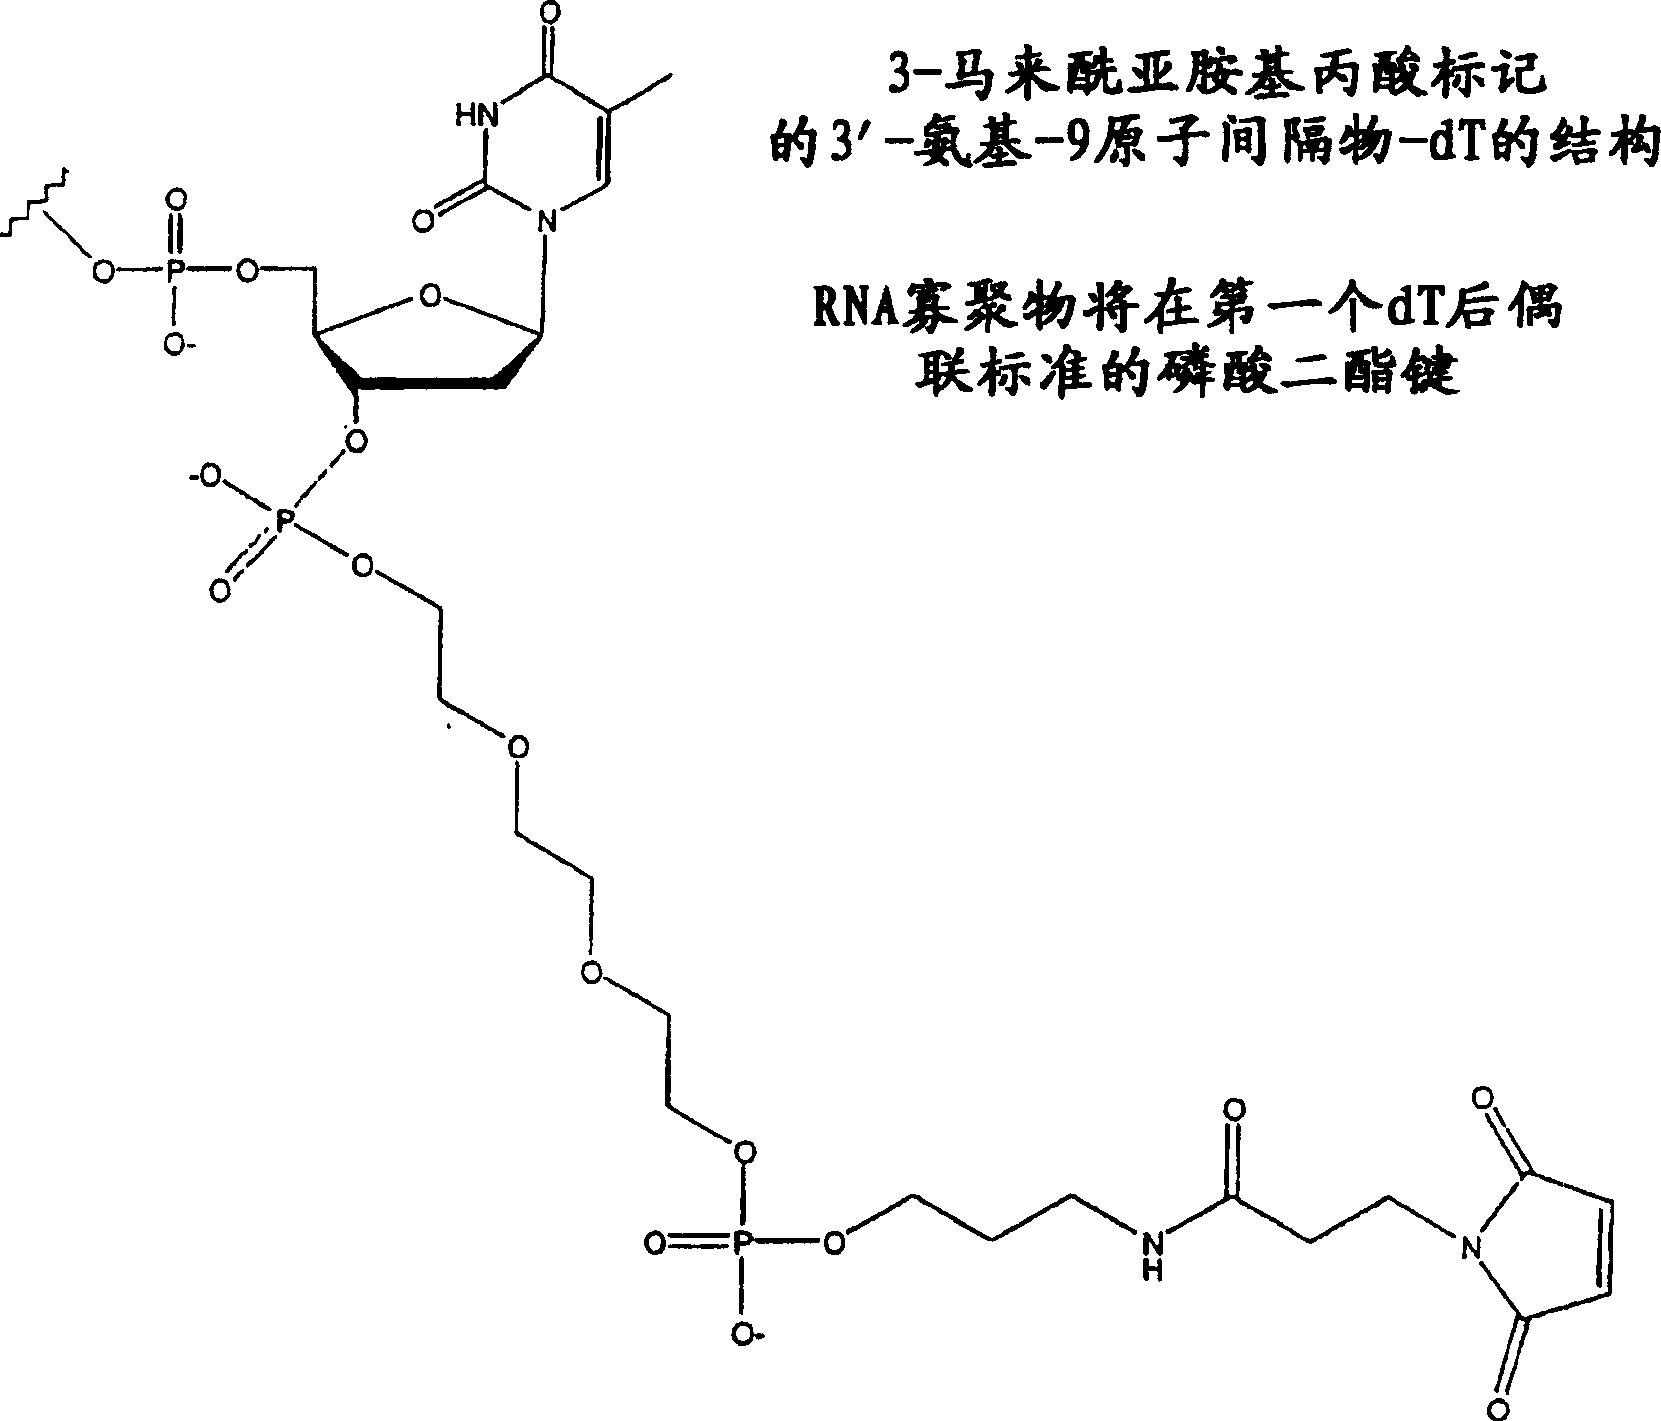 Protein carrier system for therapeutic oligonucleotides